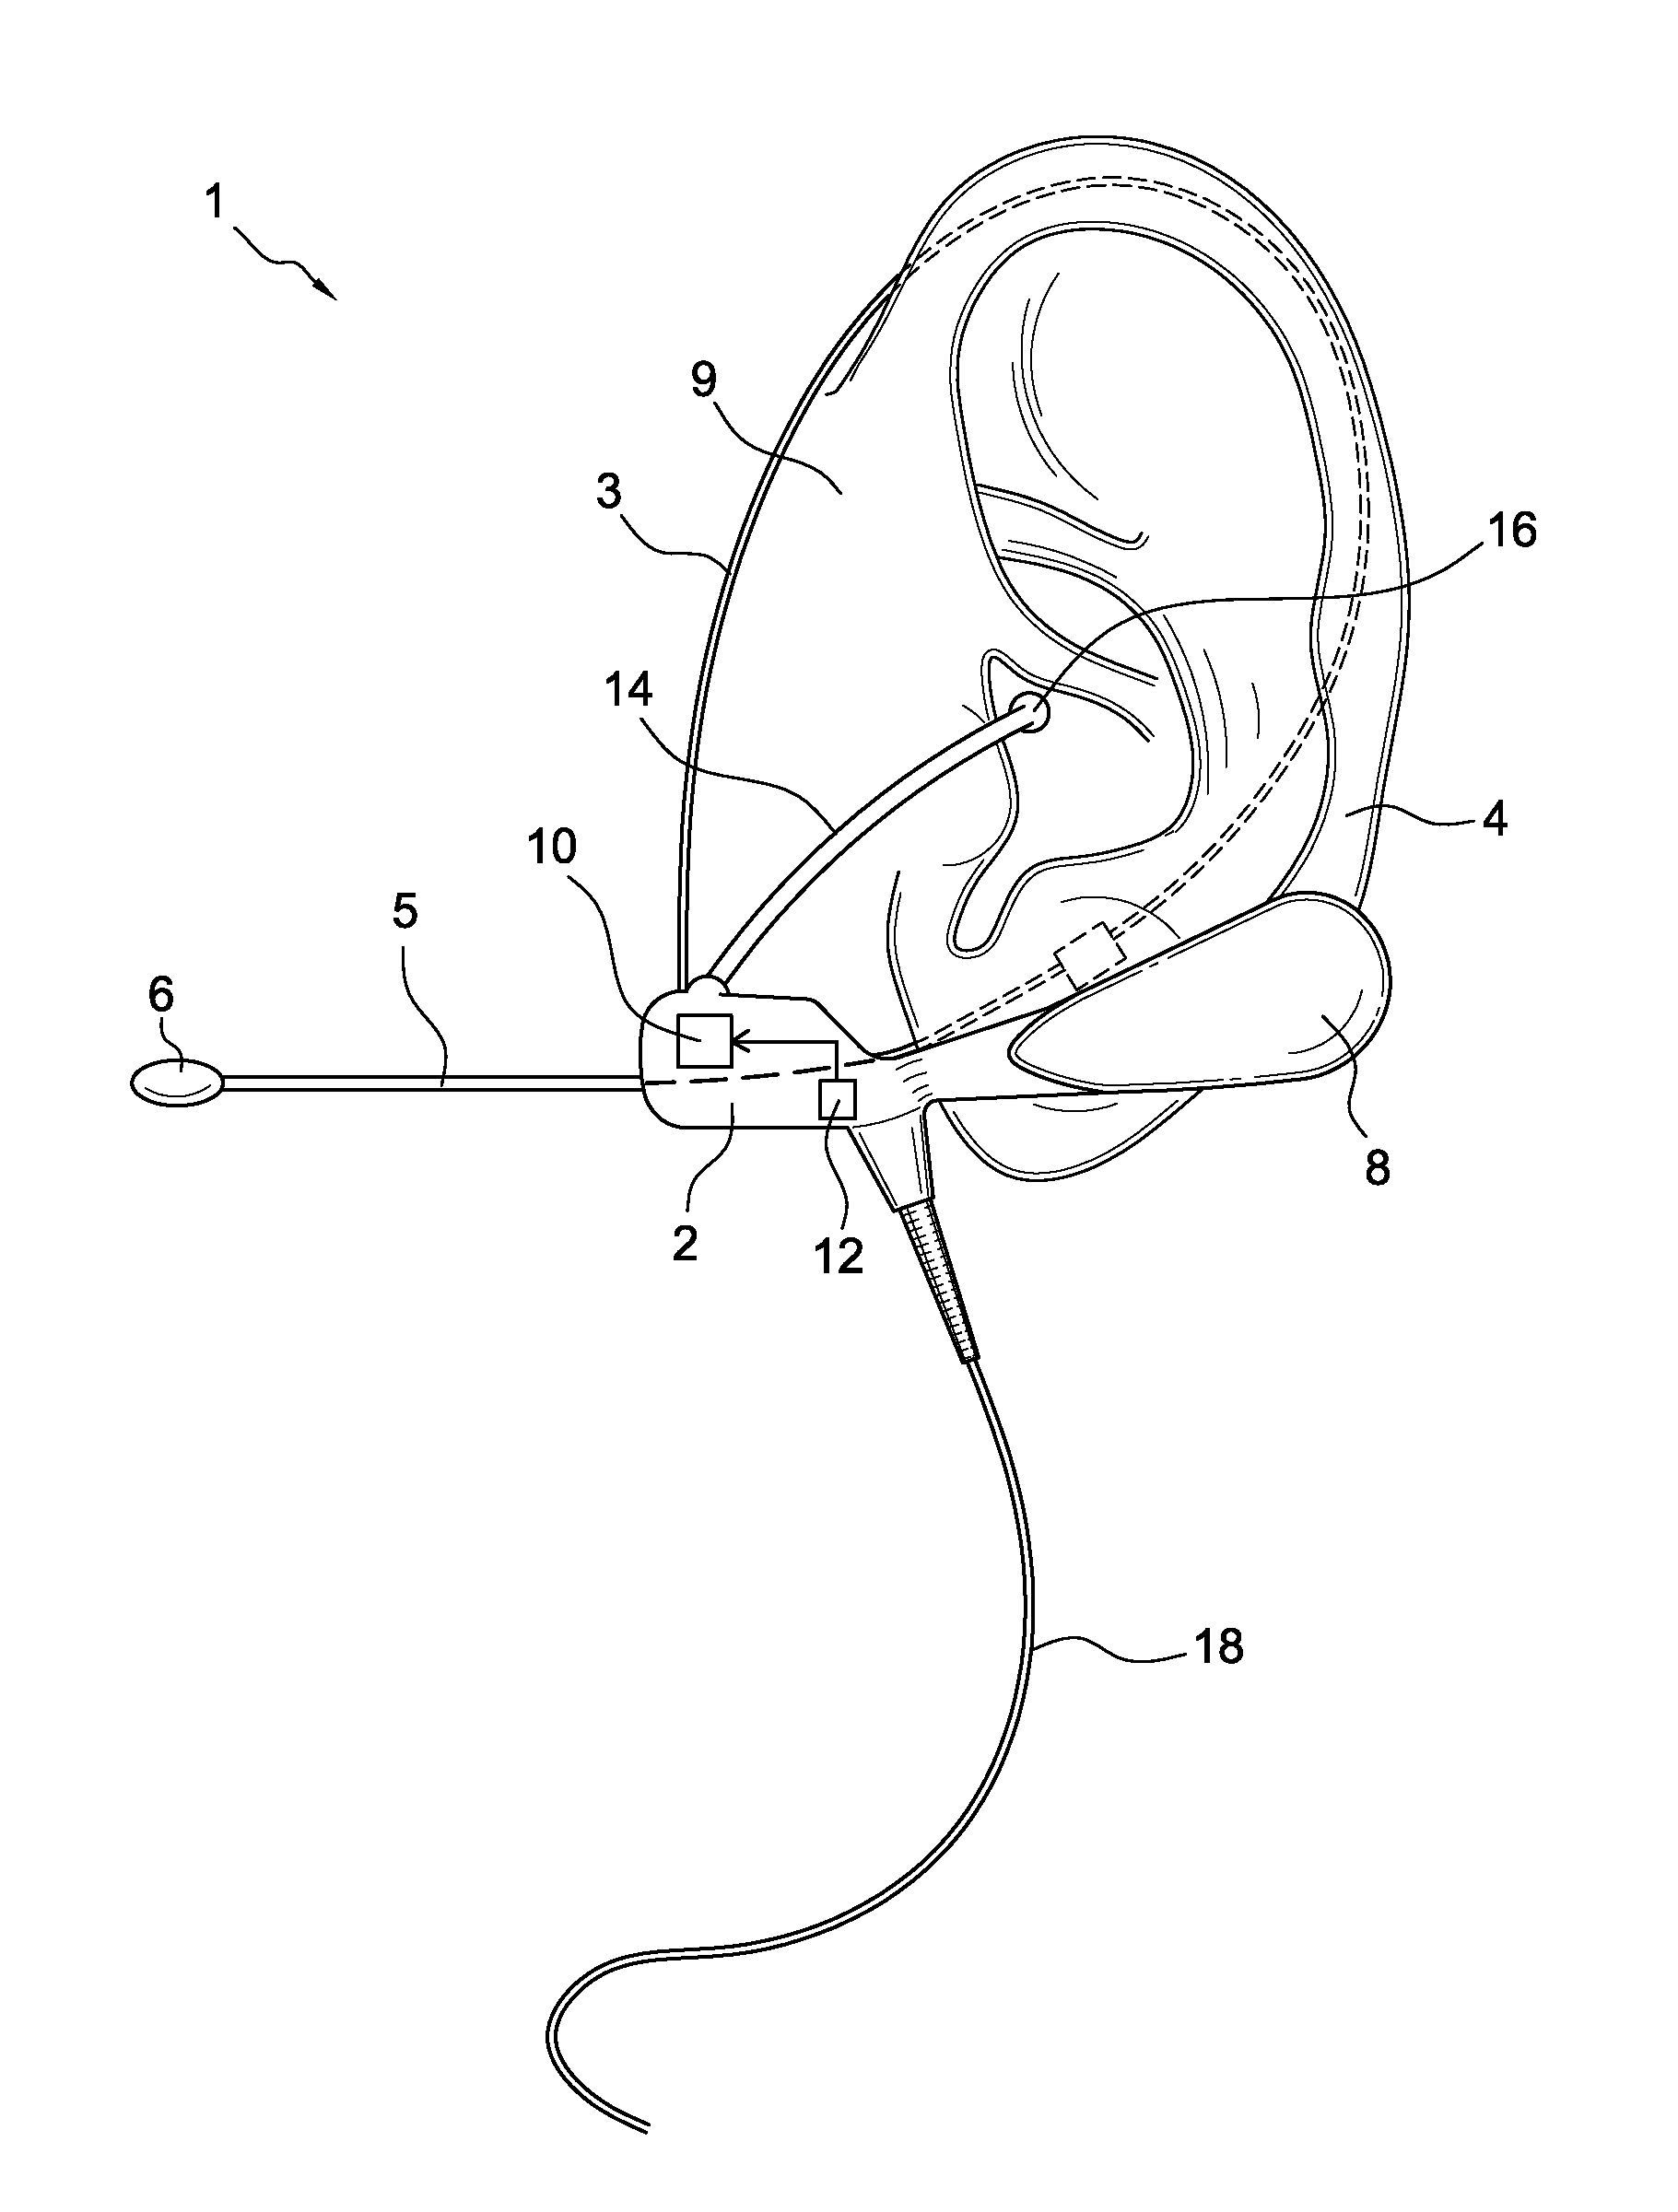 Headset for fitting of an earpiece